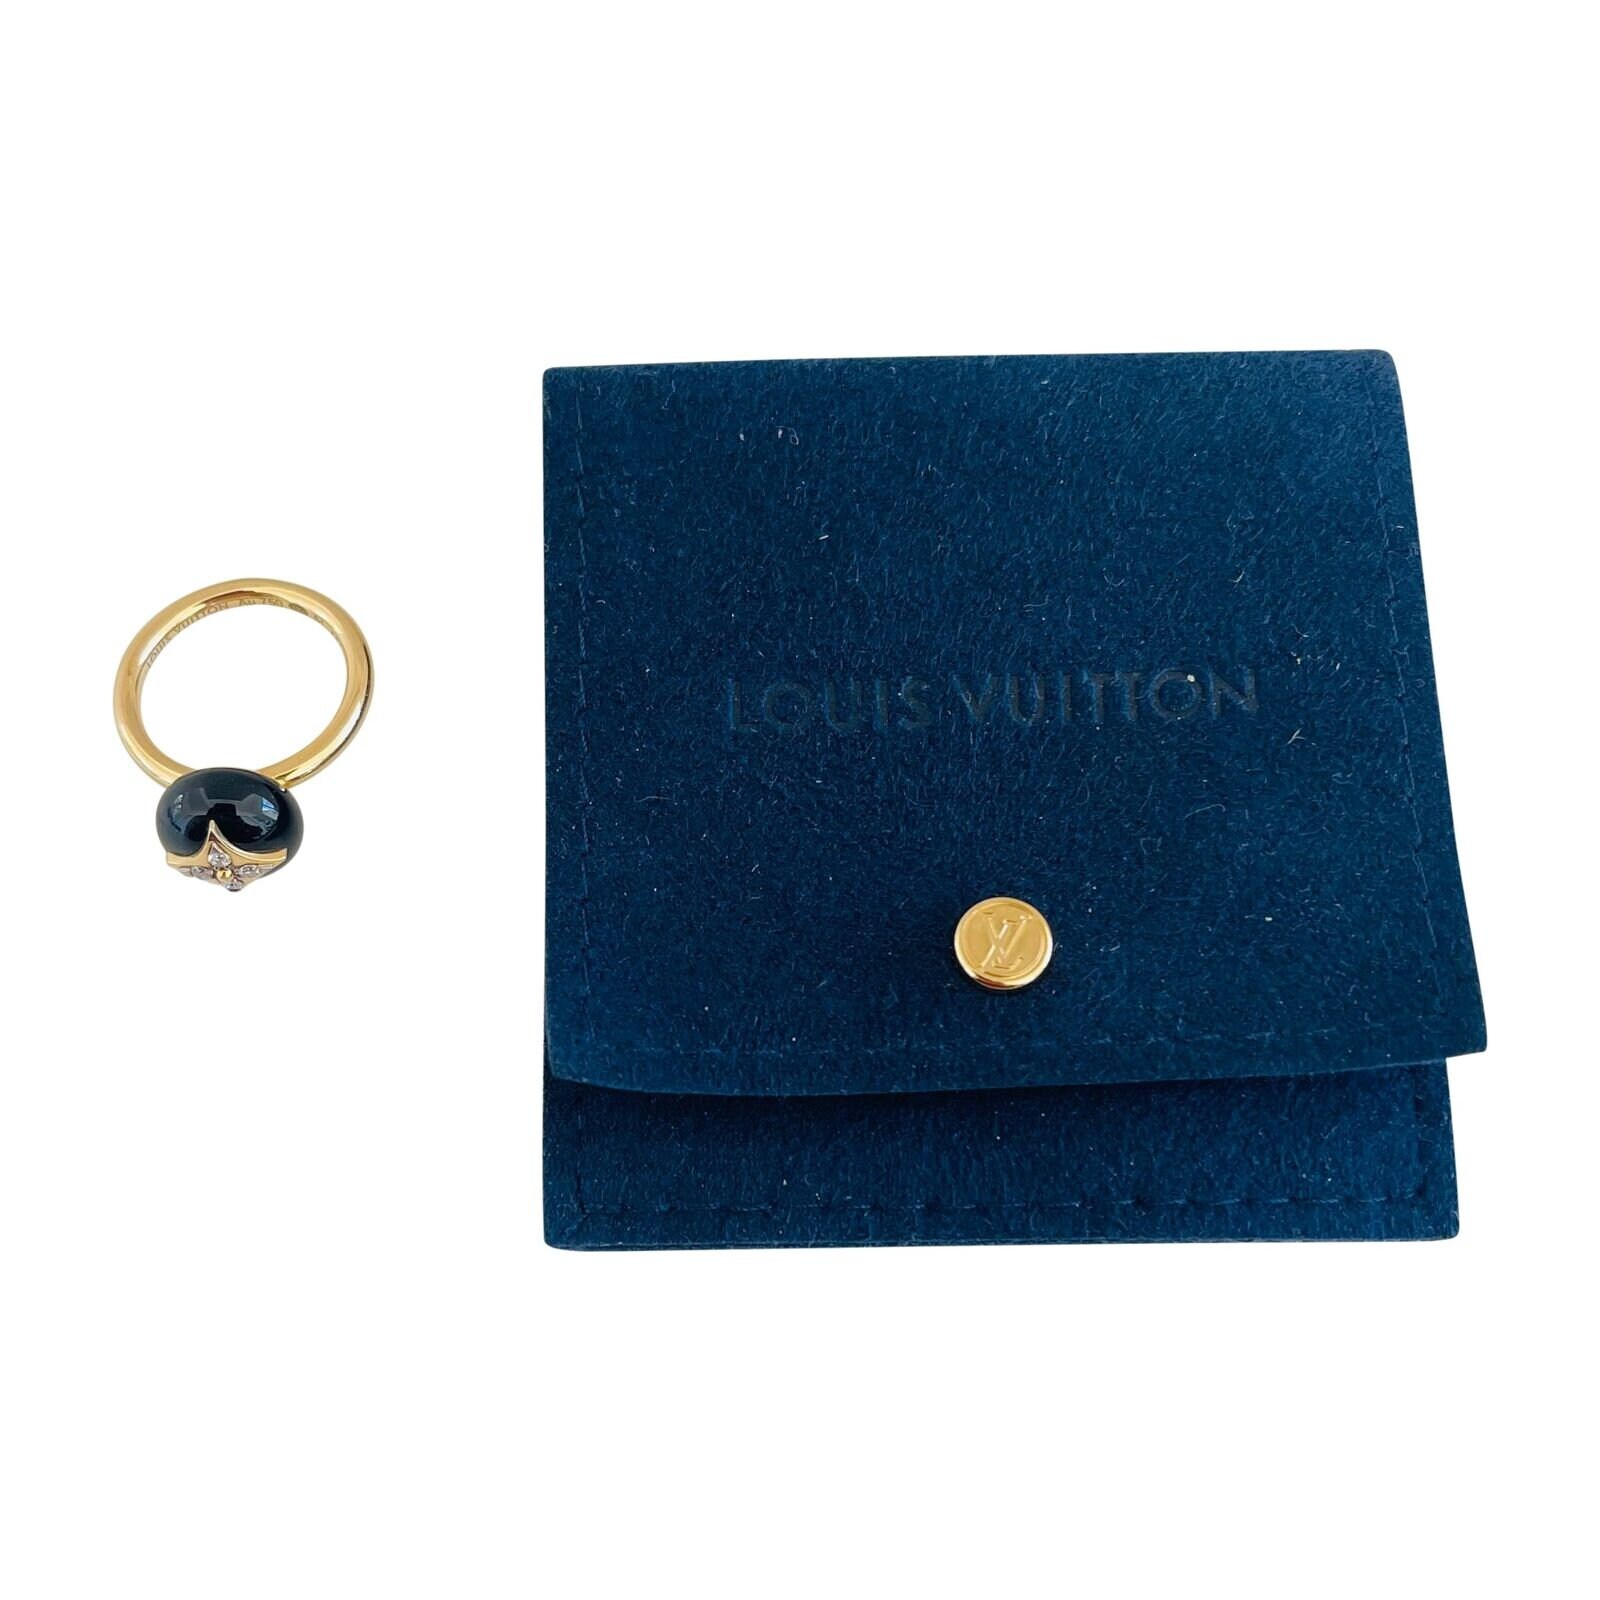 Louis Vuitton B Blossom Signet 18k Yellow Gold Onyx and Diamond Cocktail  Ring at 1stDibs